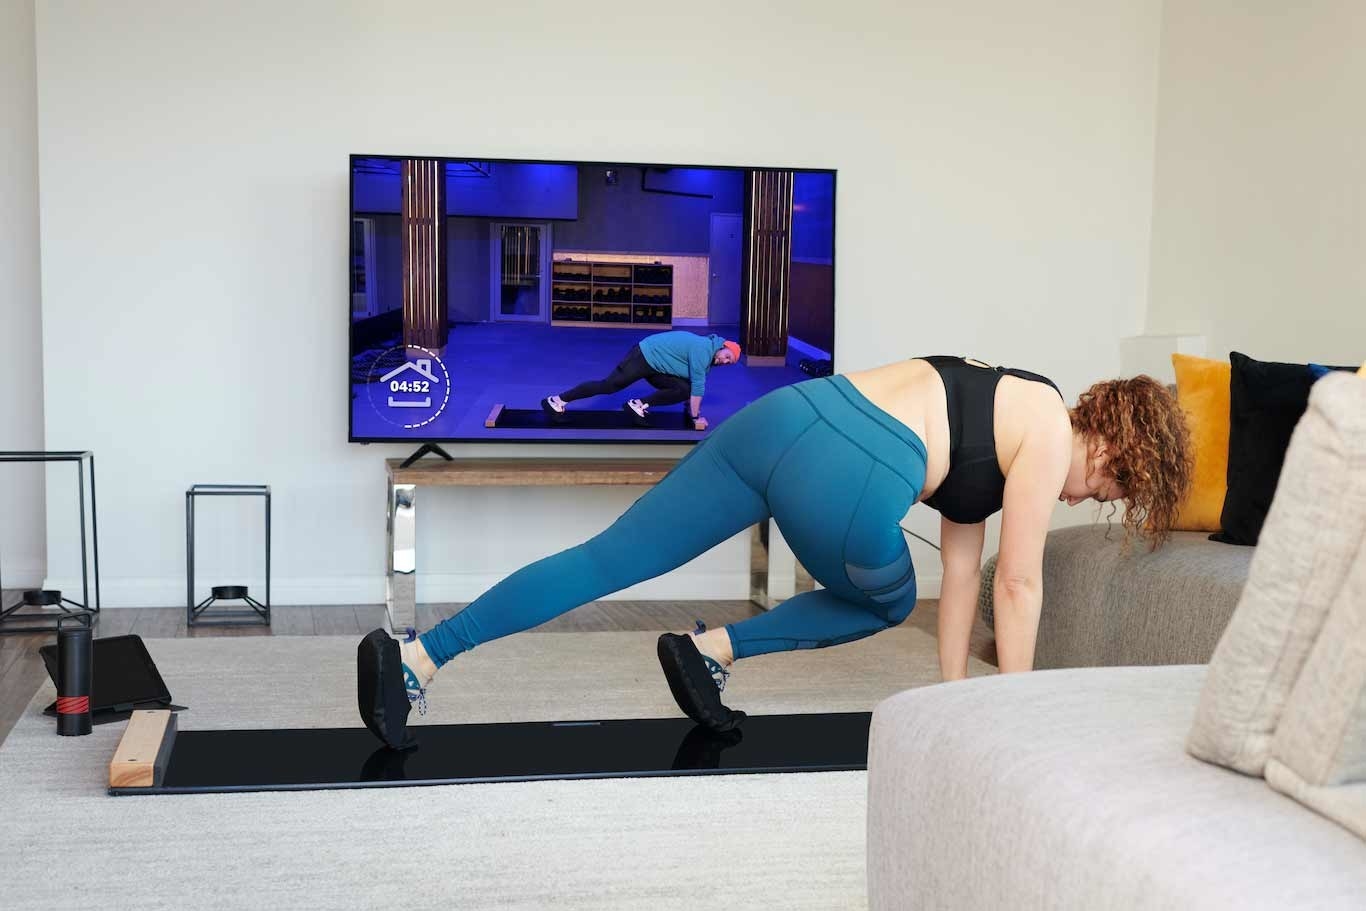 model completing bodyweight exercise with the Brrrn Board in living room